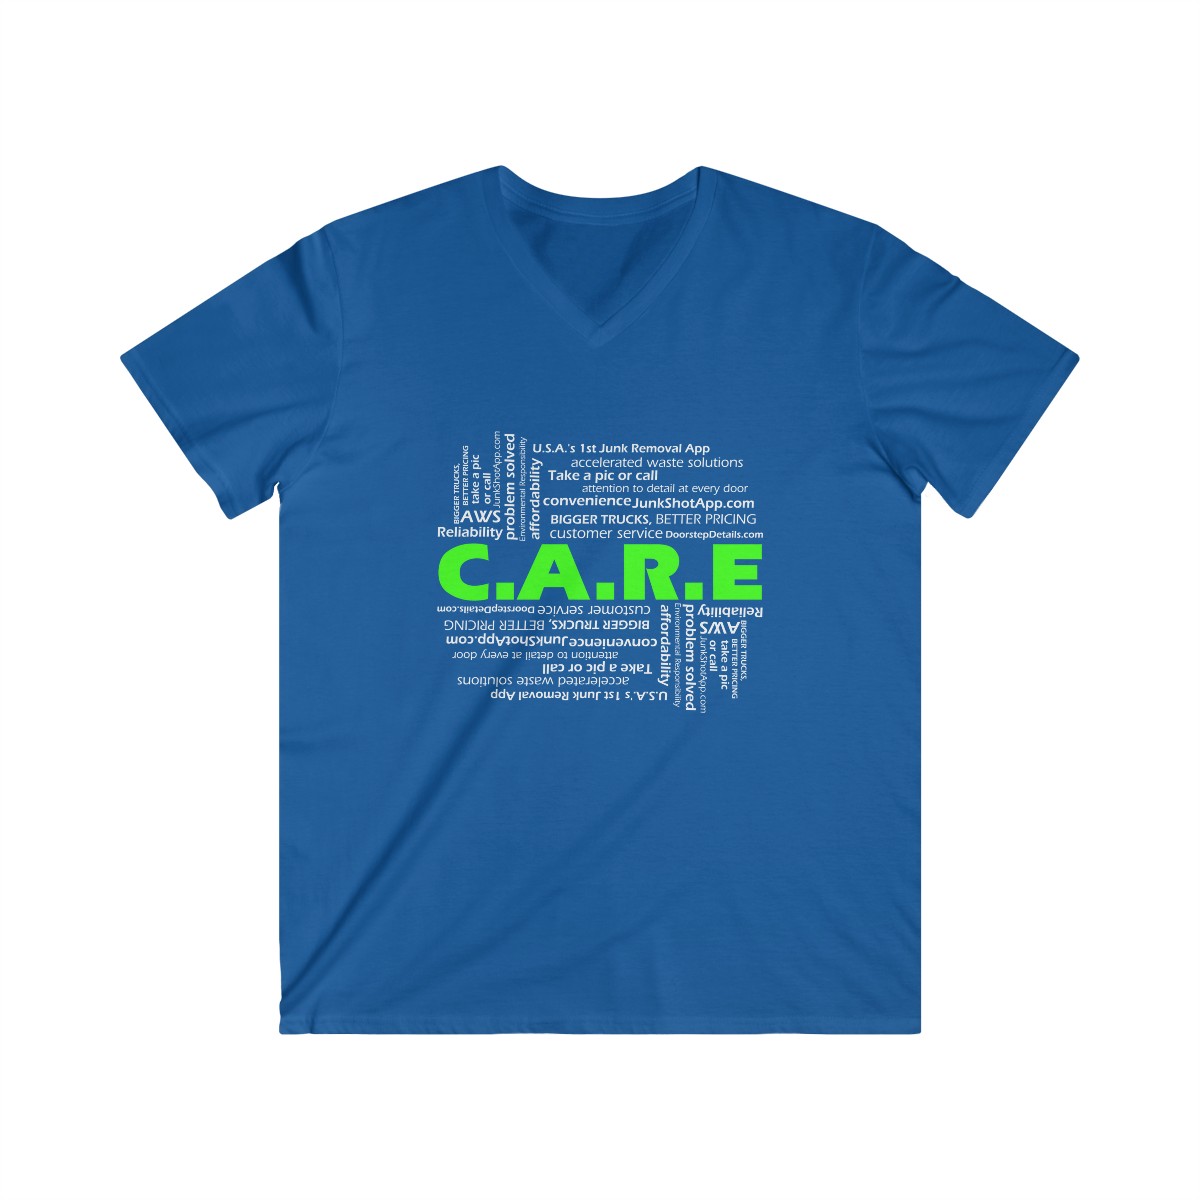 "We C.A.R.E." Men's Fitted V-Neck Short Sleeve Tee product thumbnail image